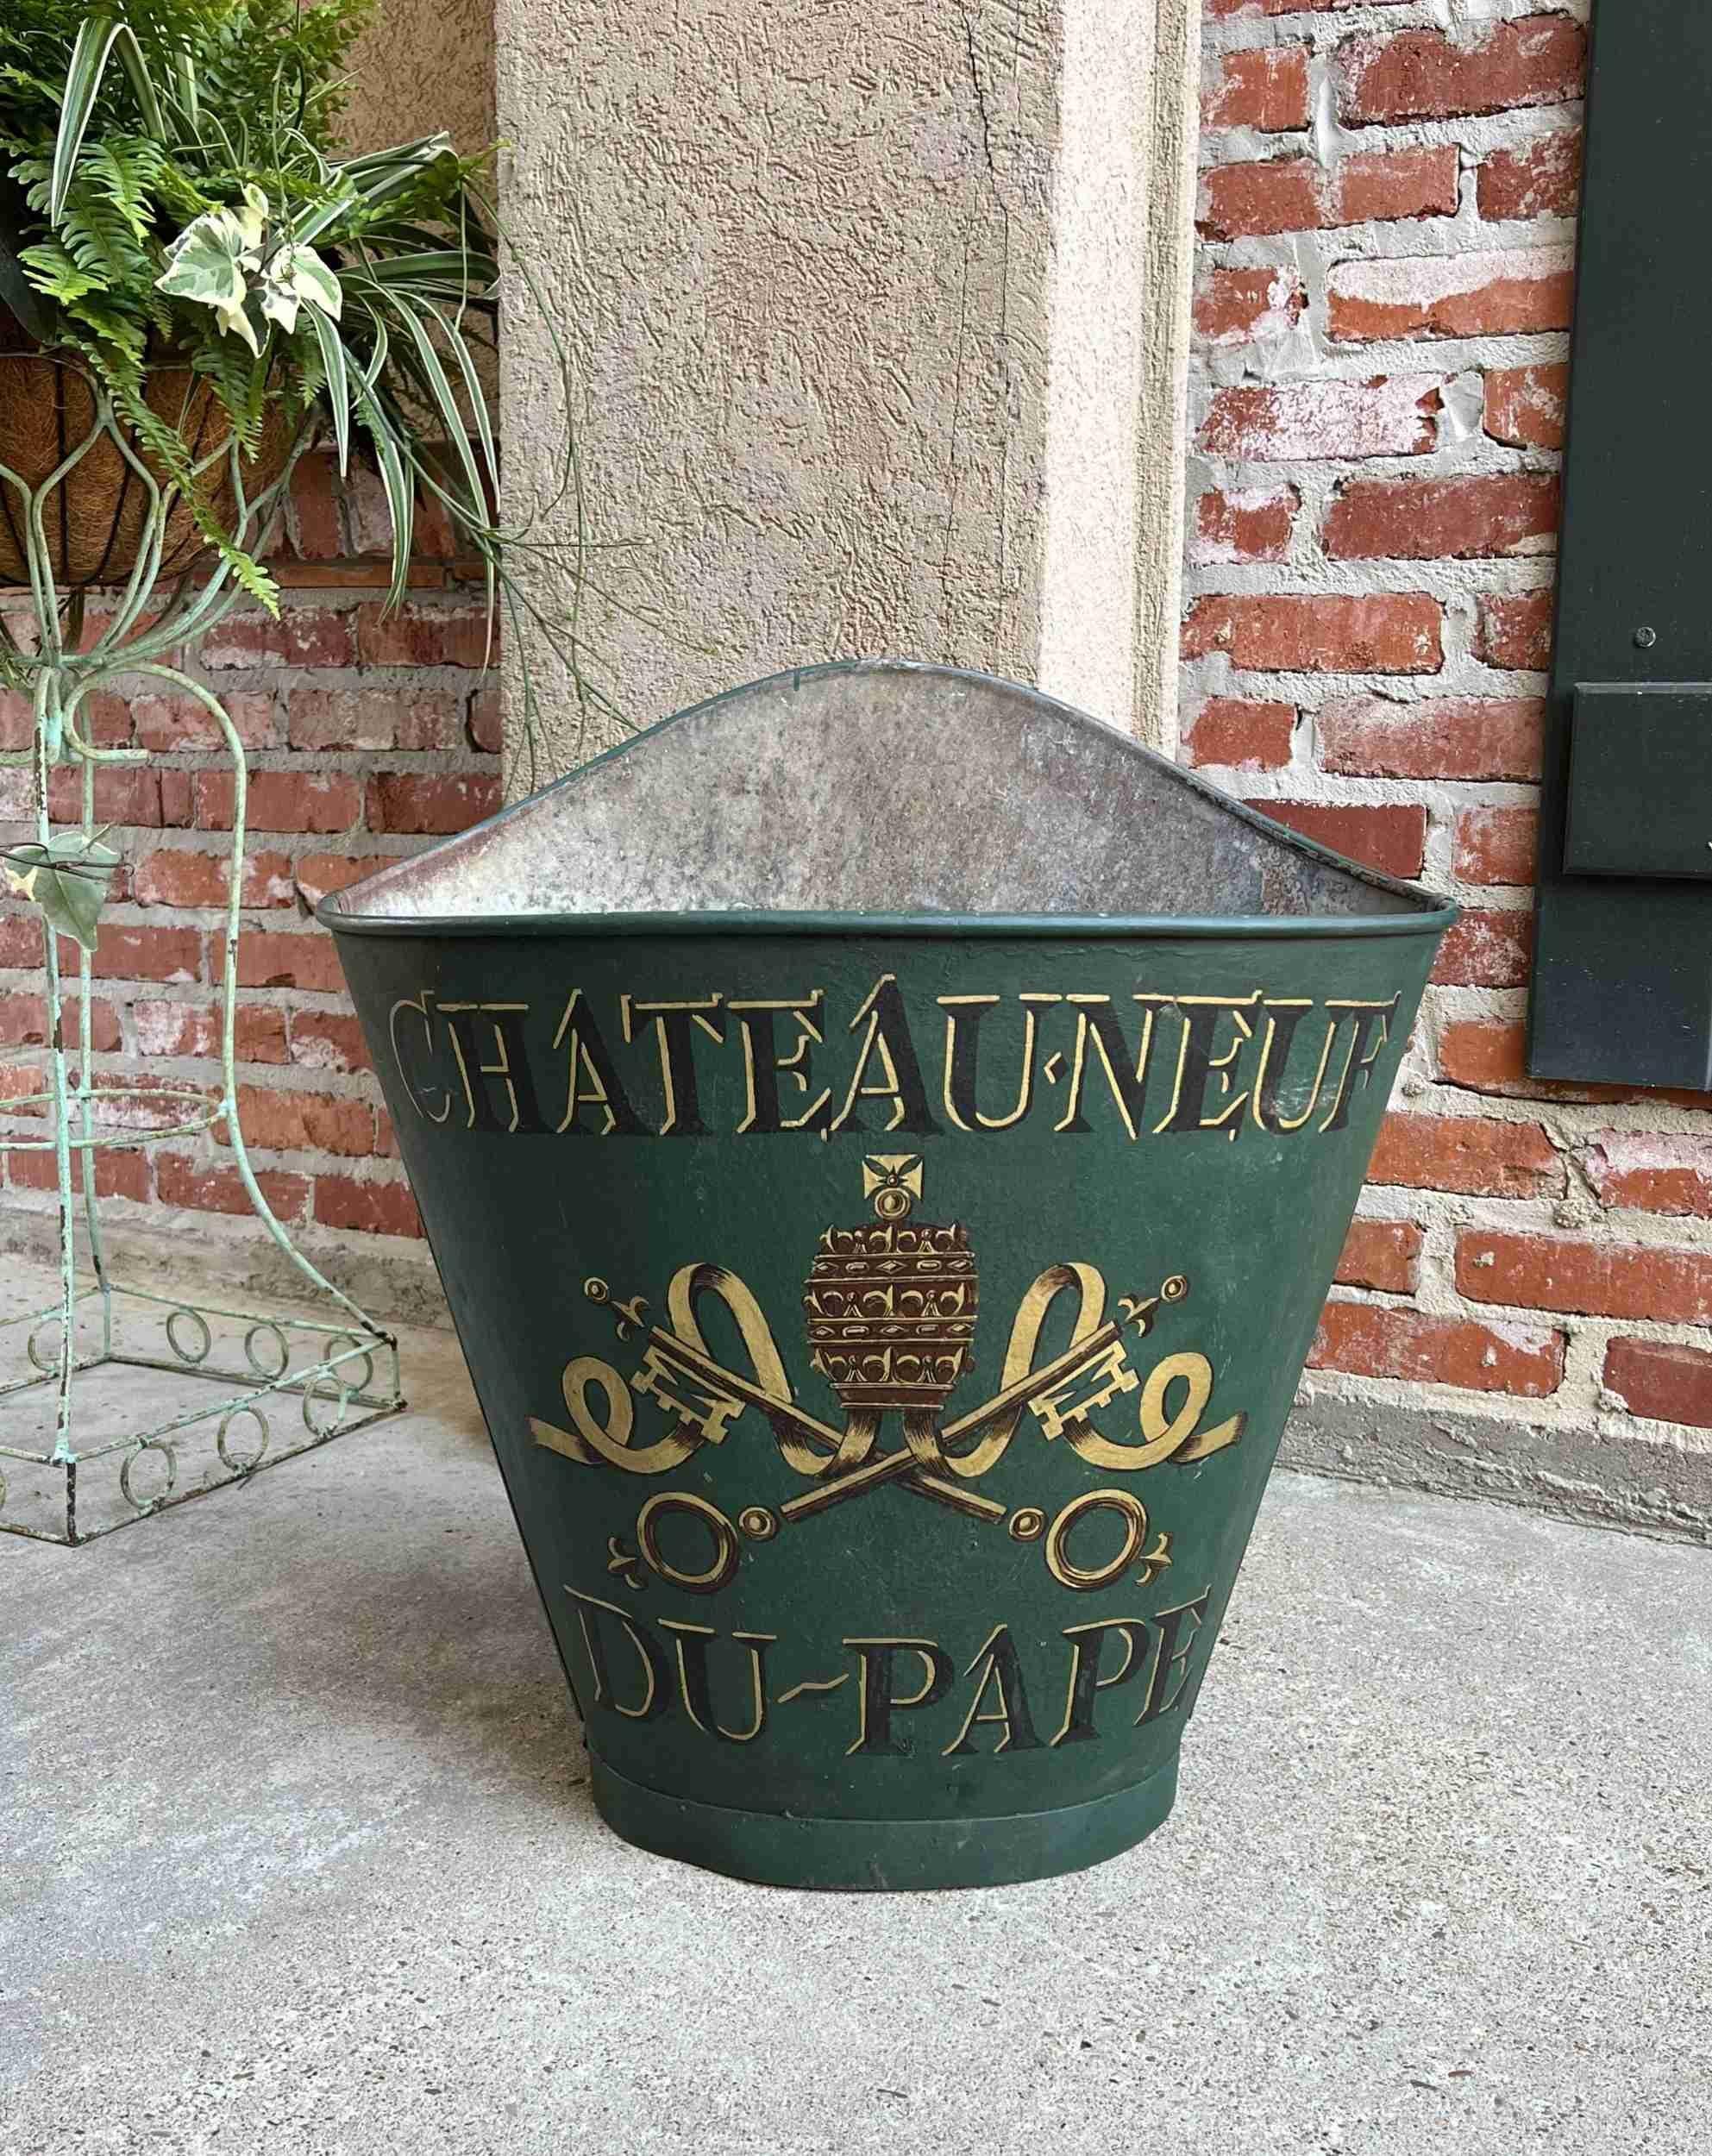 19th century French vineyard grape hod hotte bucket wine vineyard tole painted.

Direct from France, a wonderful antique metal grape hod or “hotte”, with stunning hand painted French designed artwork. In the 19th century French vineyards, these hods